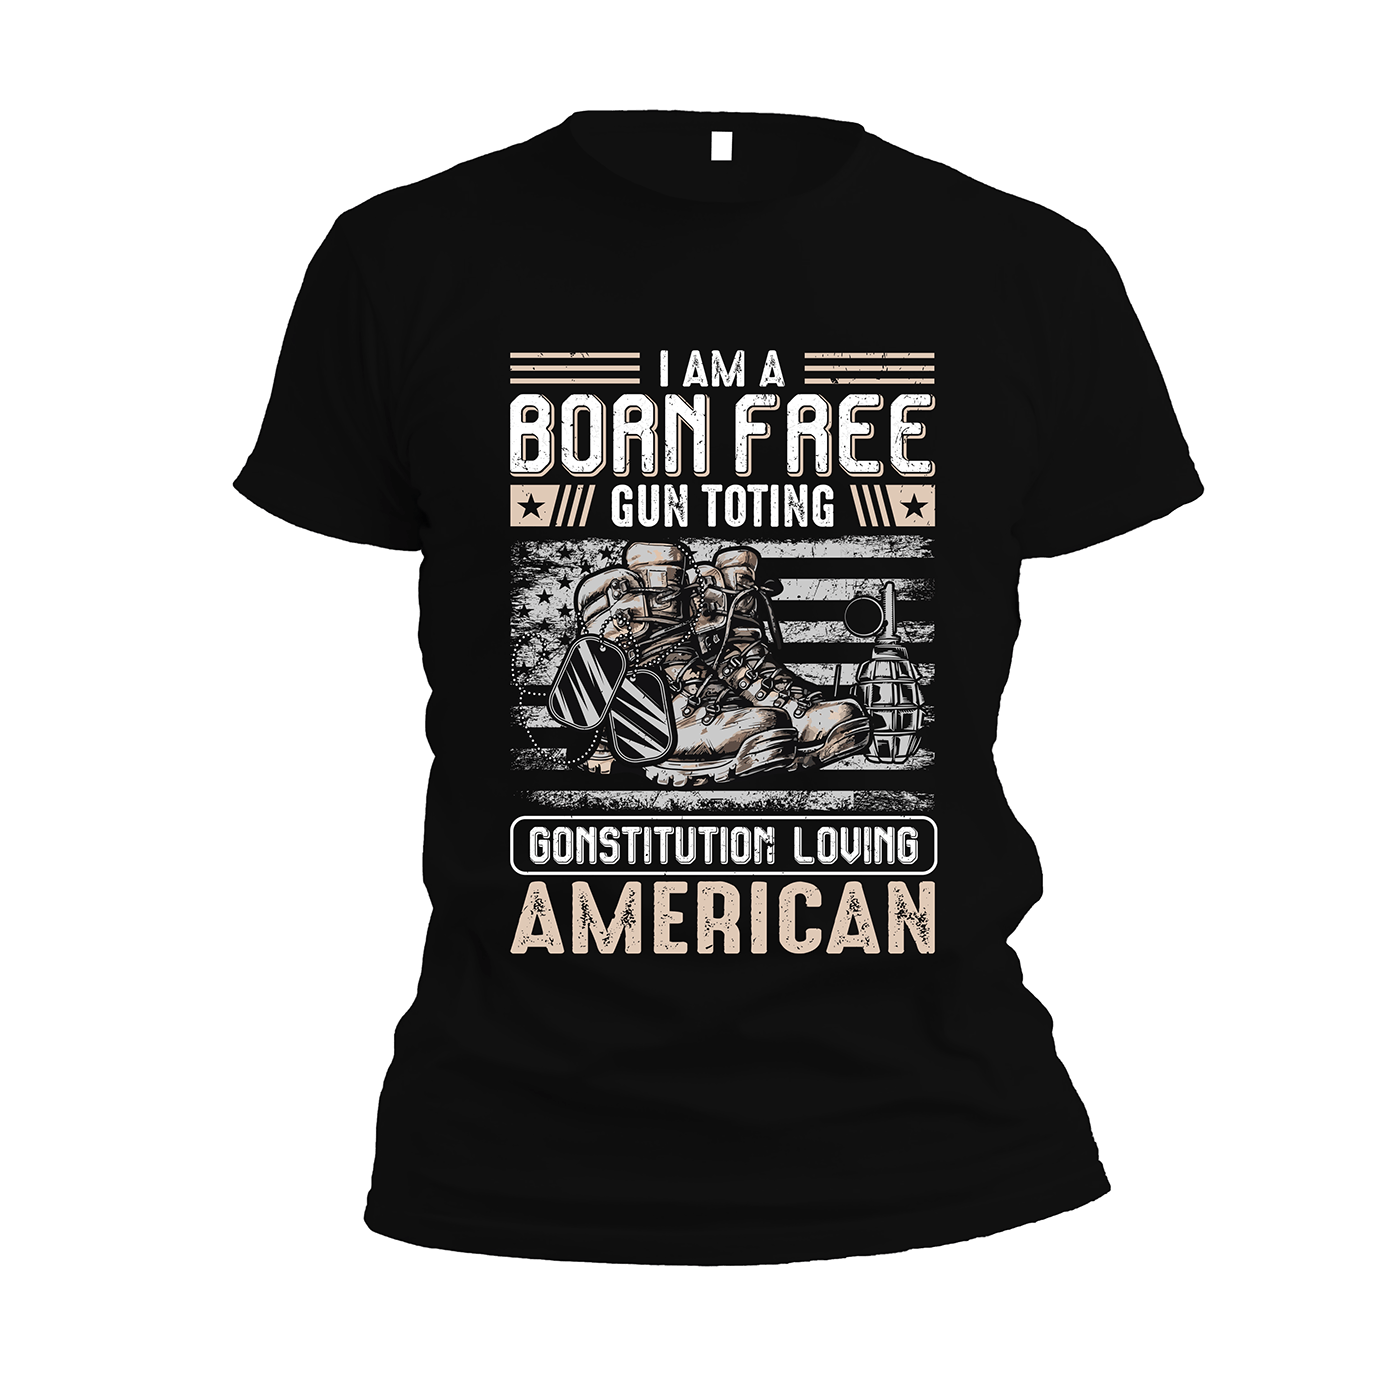 Distressed patriotic usa flag vector T-Shirt Design graphic vintage 4th july Distressed T-Shirts Flag T-Shirts patriot patriotic